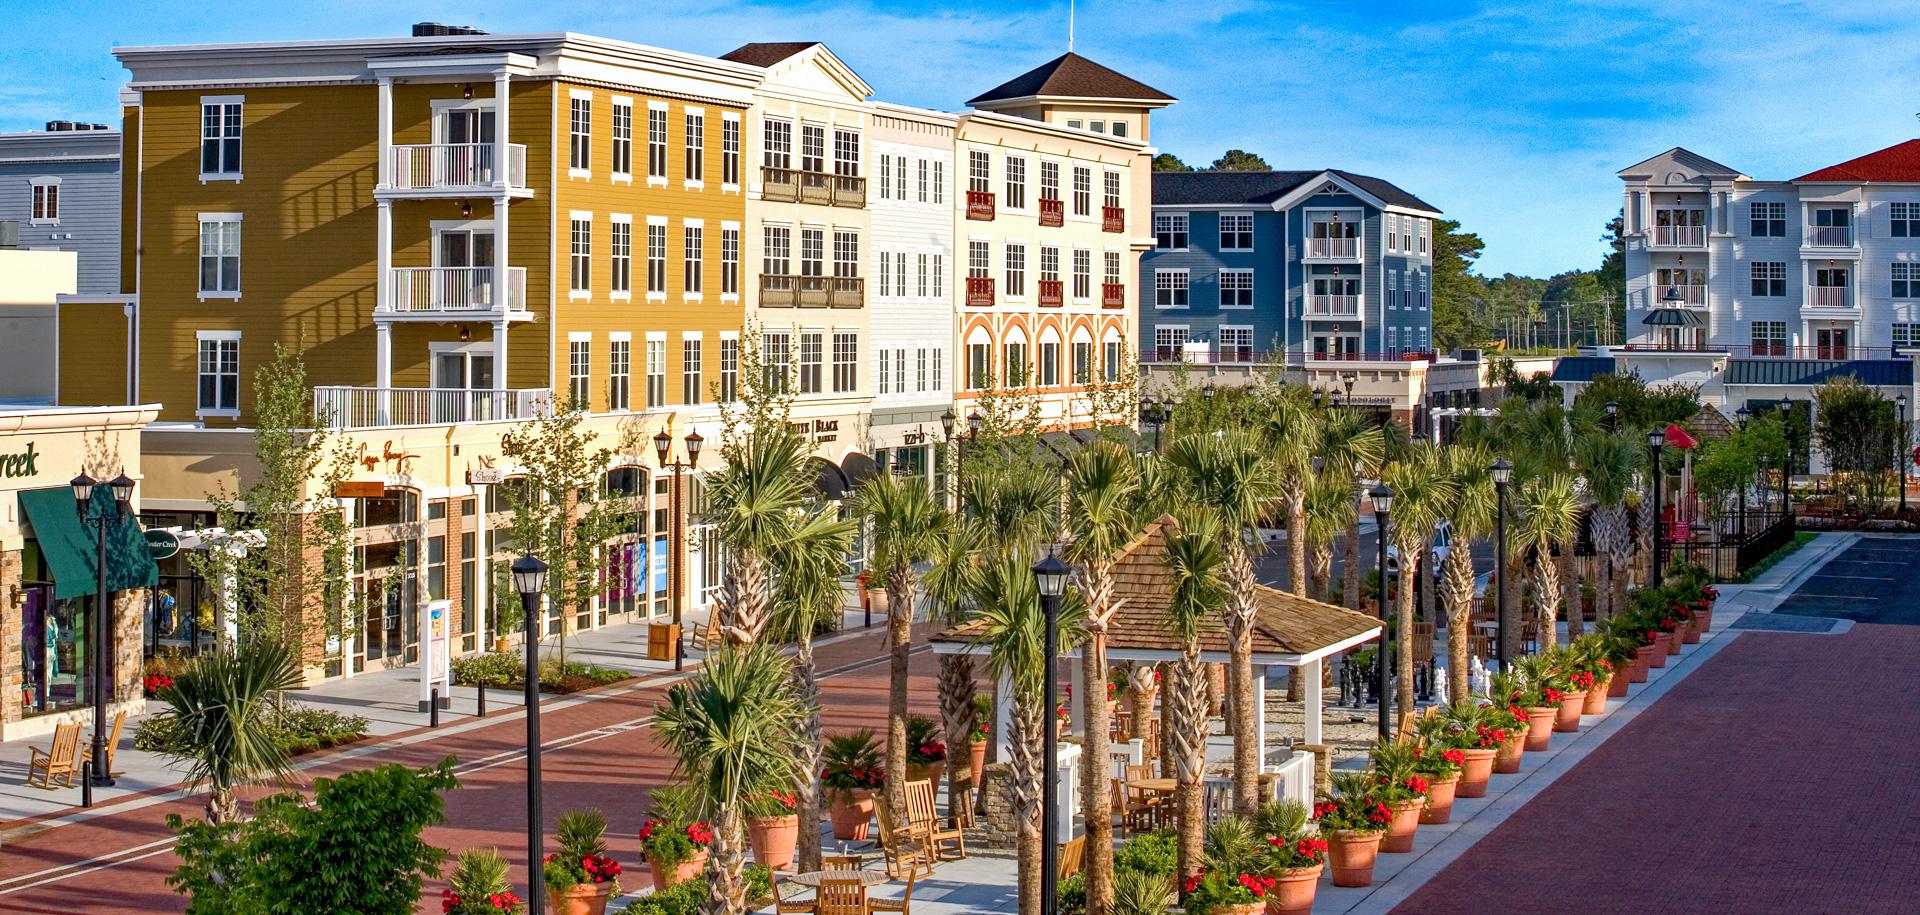 Market Commons, an upscale area with some of the best homes for sale in Myrtle Beach